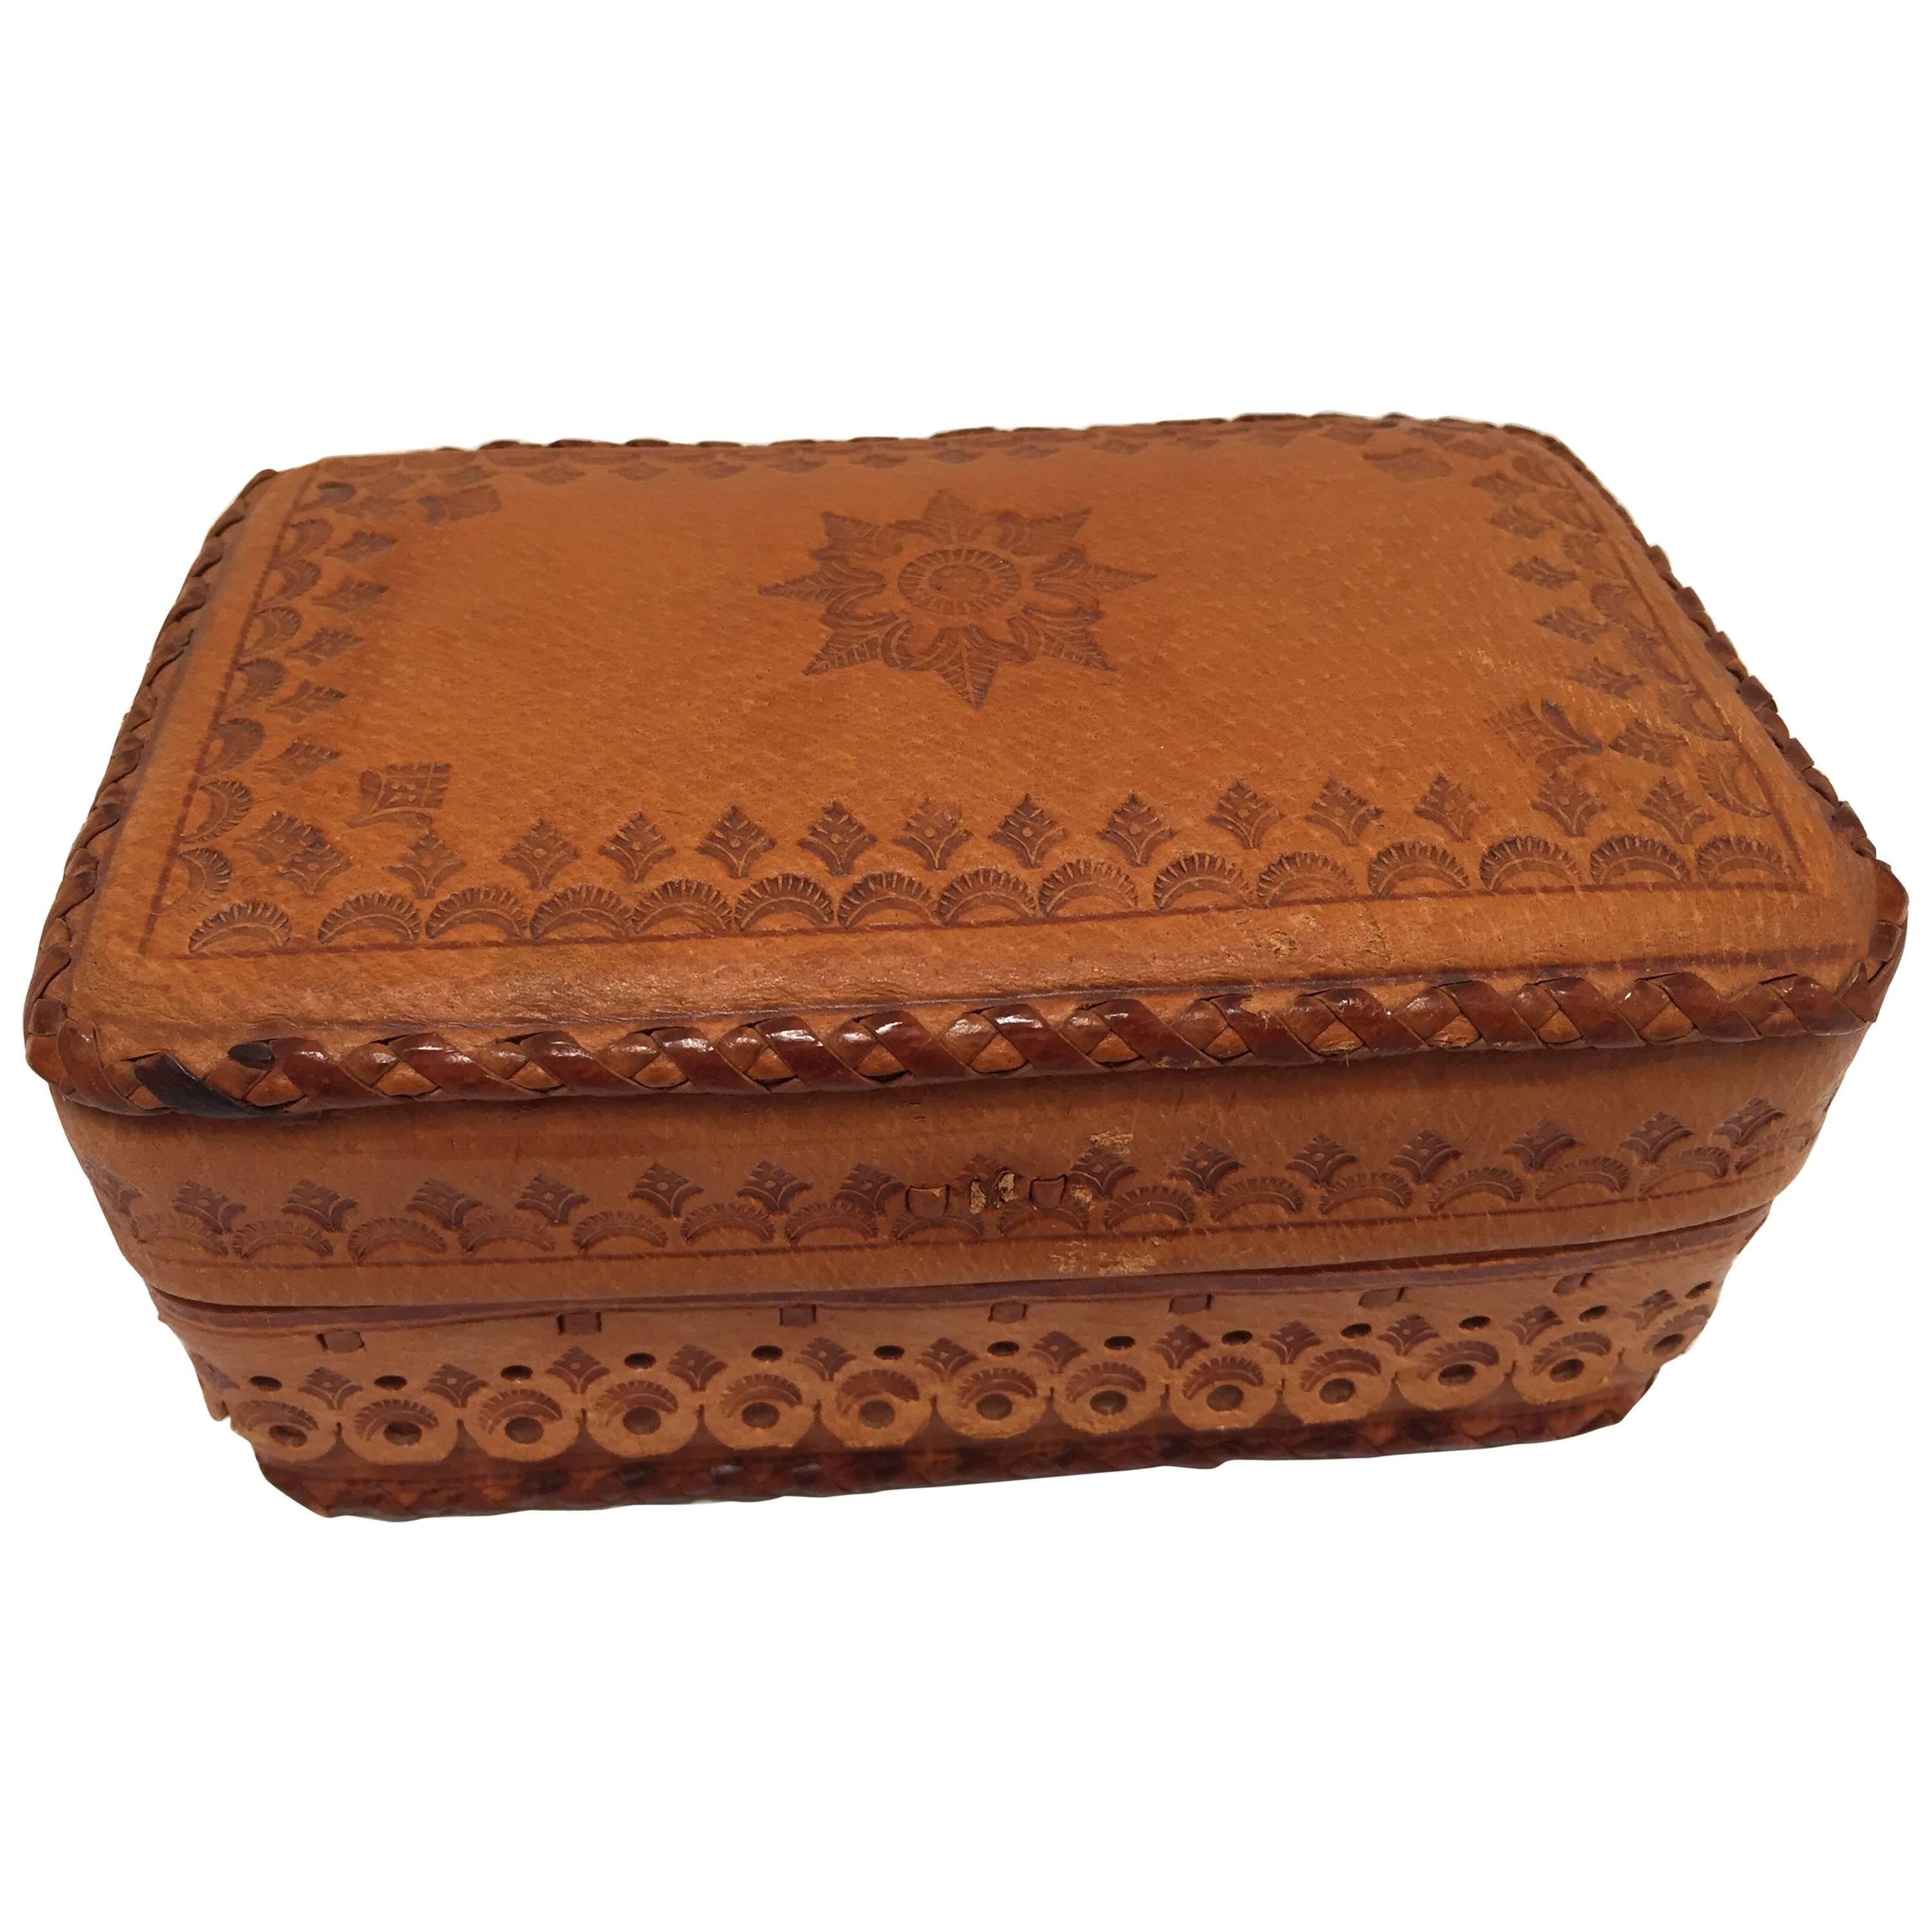 Leather Vintage Brown Box Hand Tooled in Morocco with Tribal African Designs